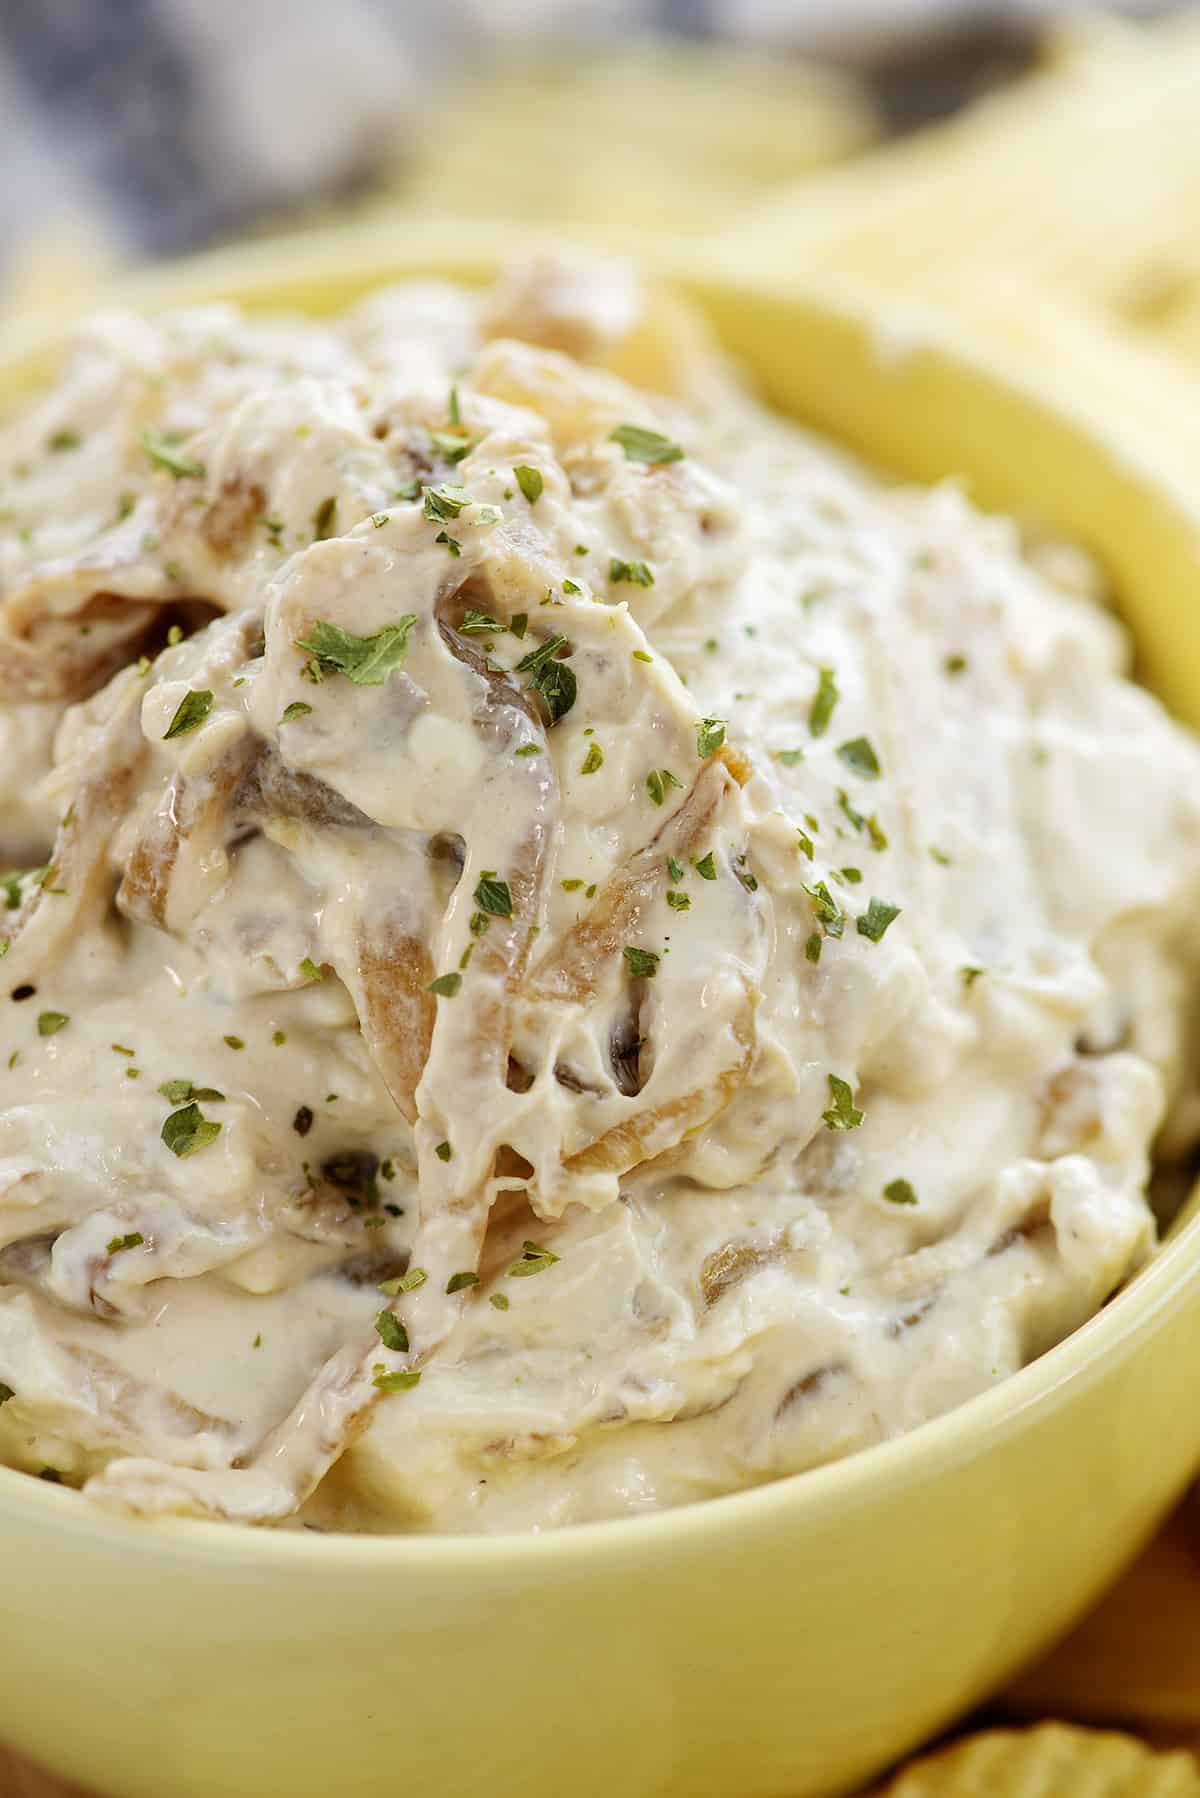 caramelized onion dip in small yellow bowl.